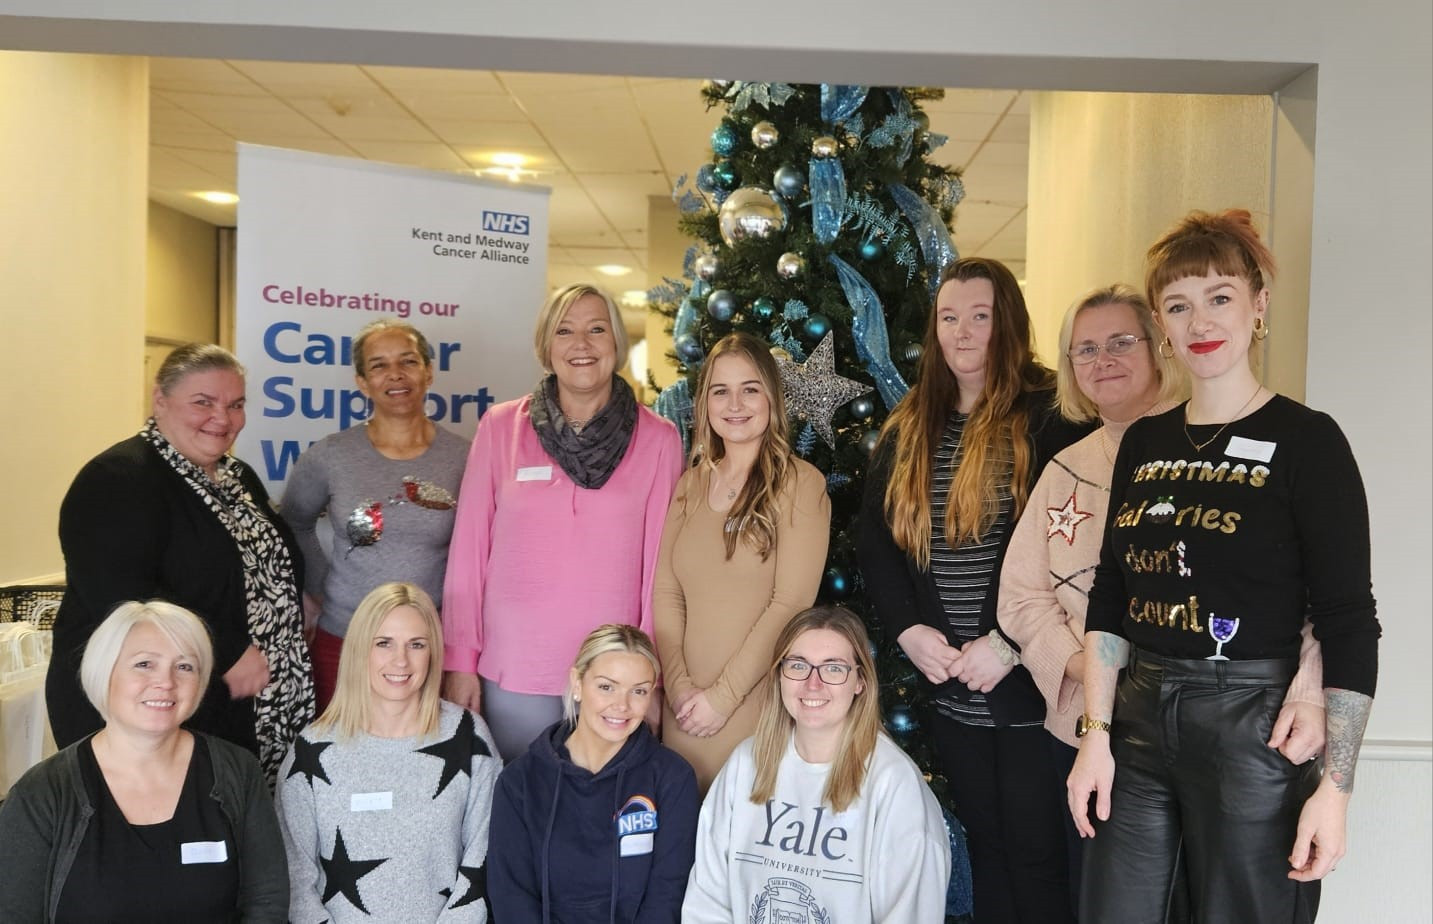 The cancer support workers who received certificates at the event